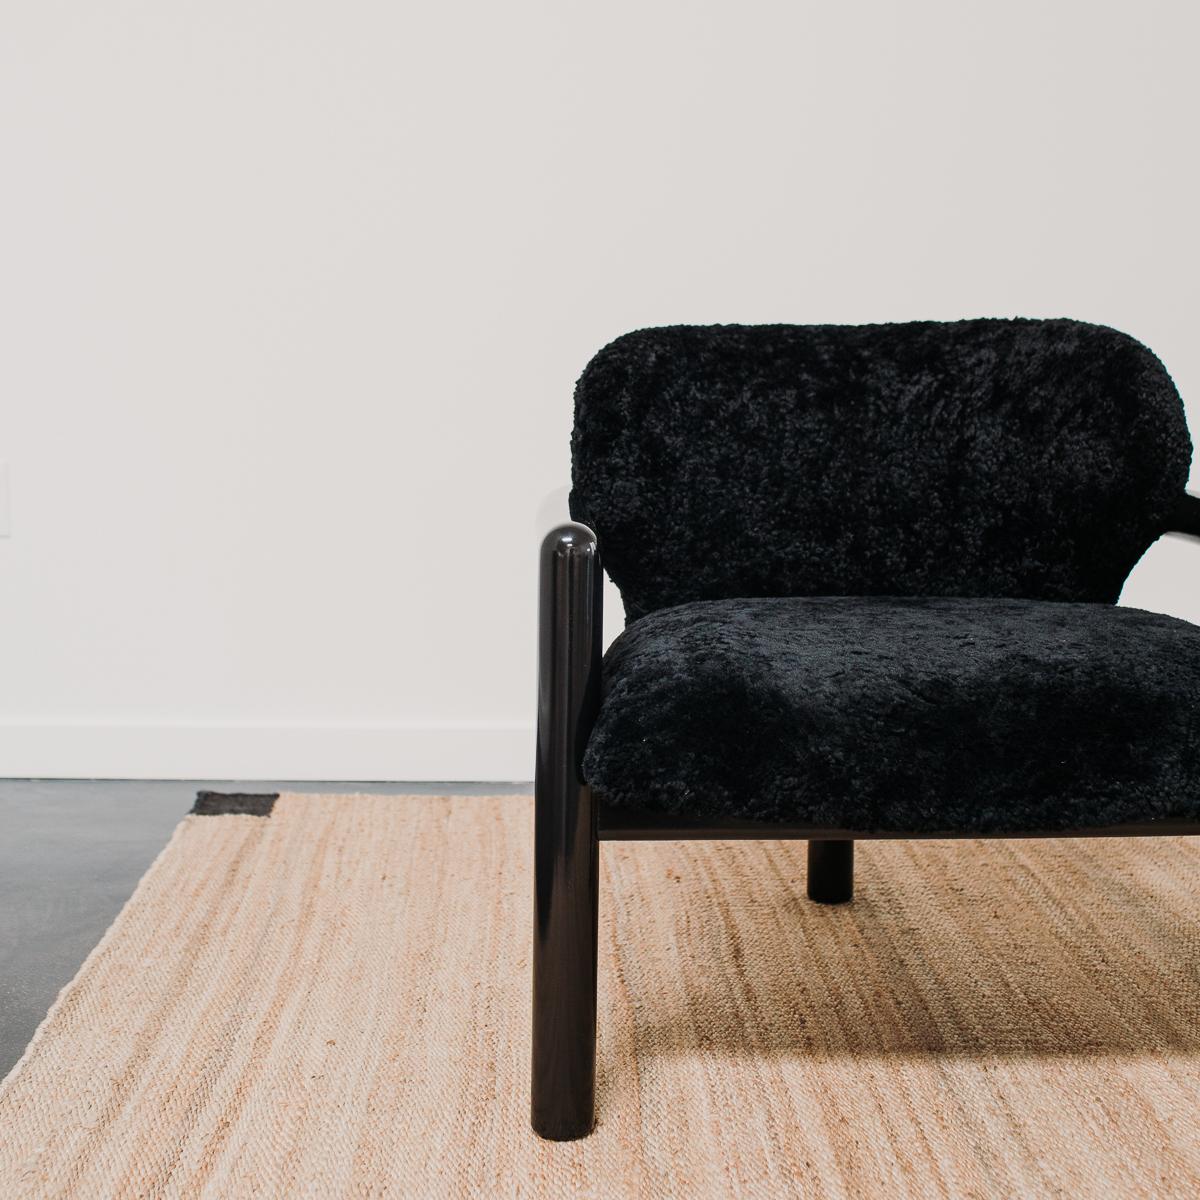 A pair of three legged armchairs chairs restored and reupholstered by the Selby House in a black Skandilock shearling.